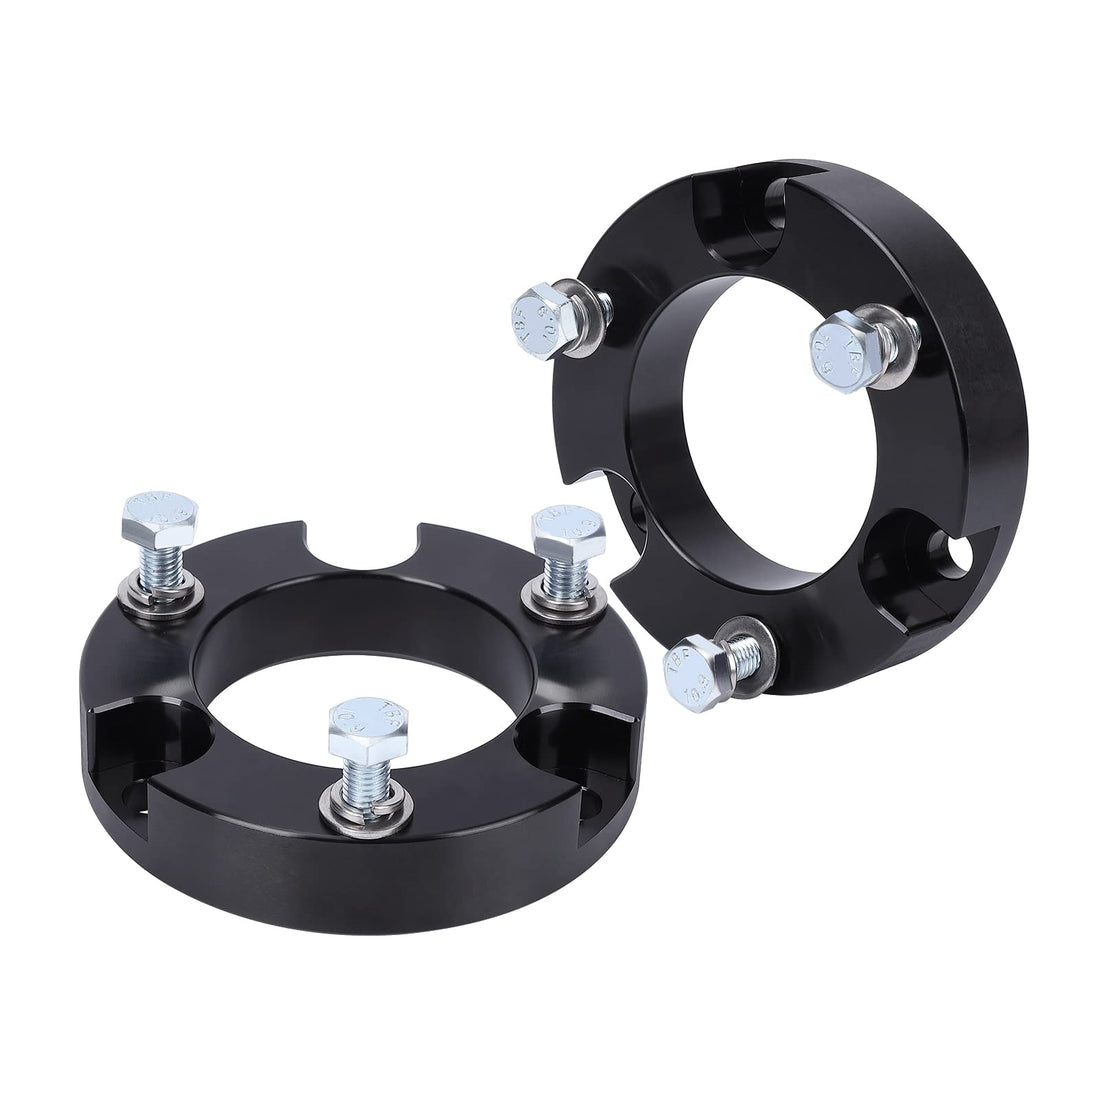 Tacoma Leveling Lift Kits 2 Inch Front Strut Spacer